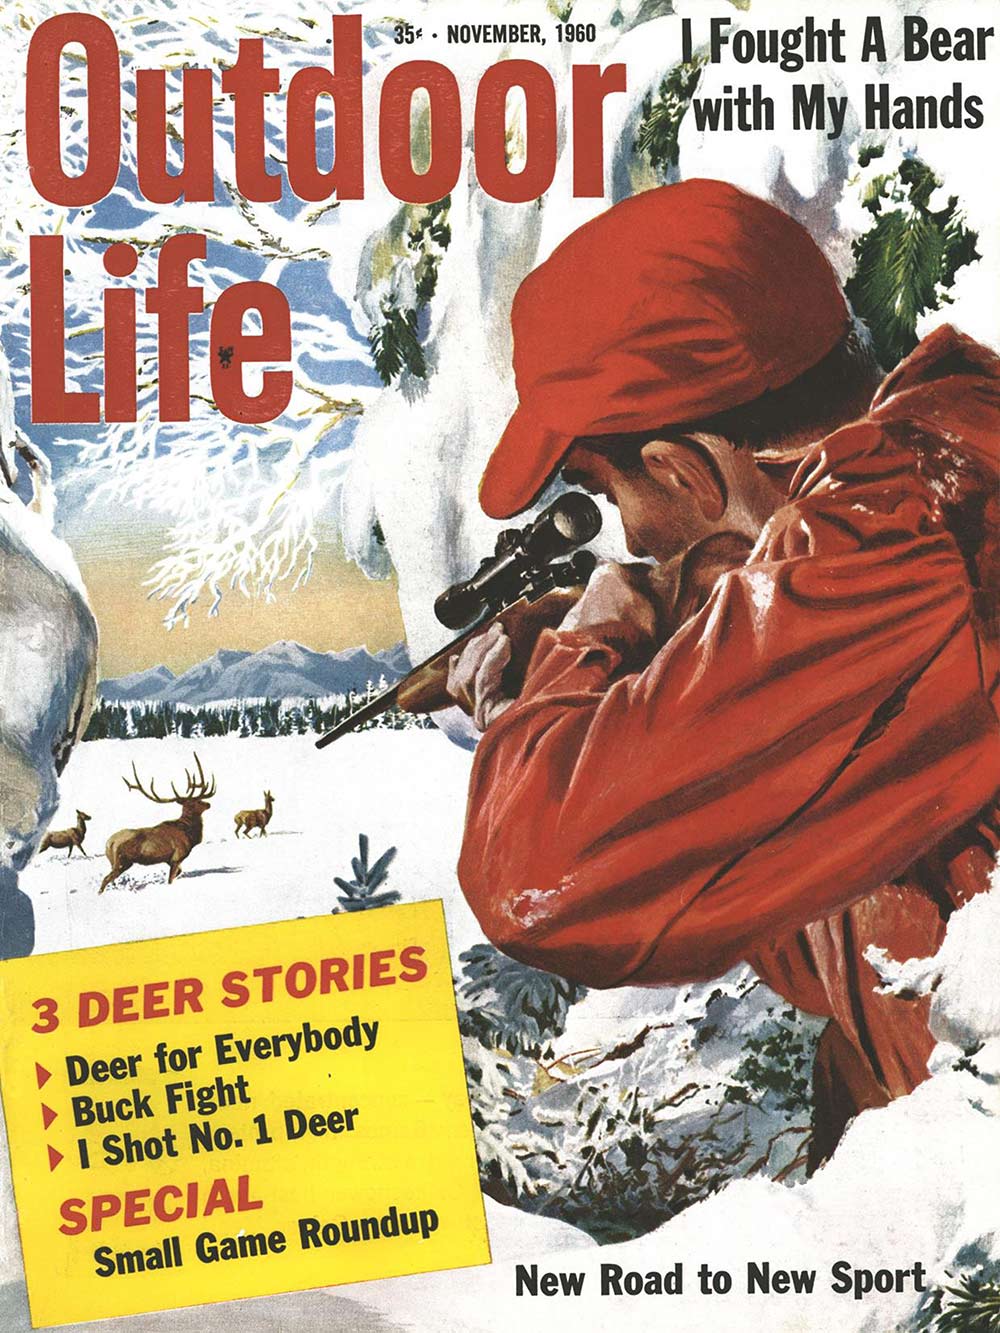 November 1960 Cover of Outdoor Life